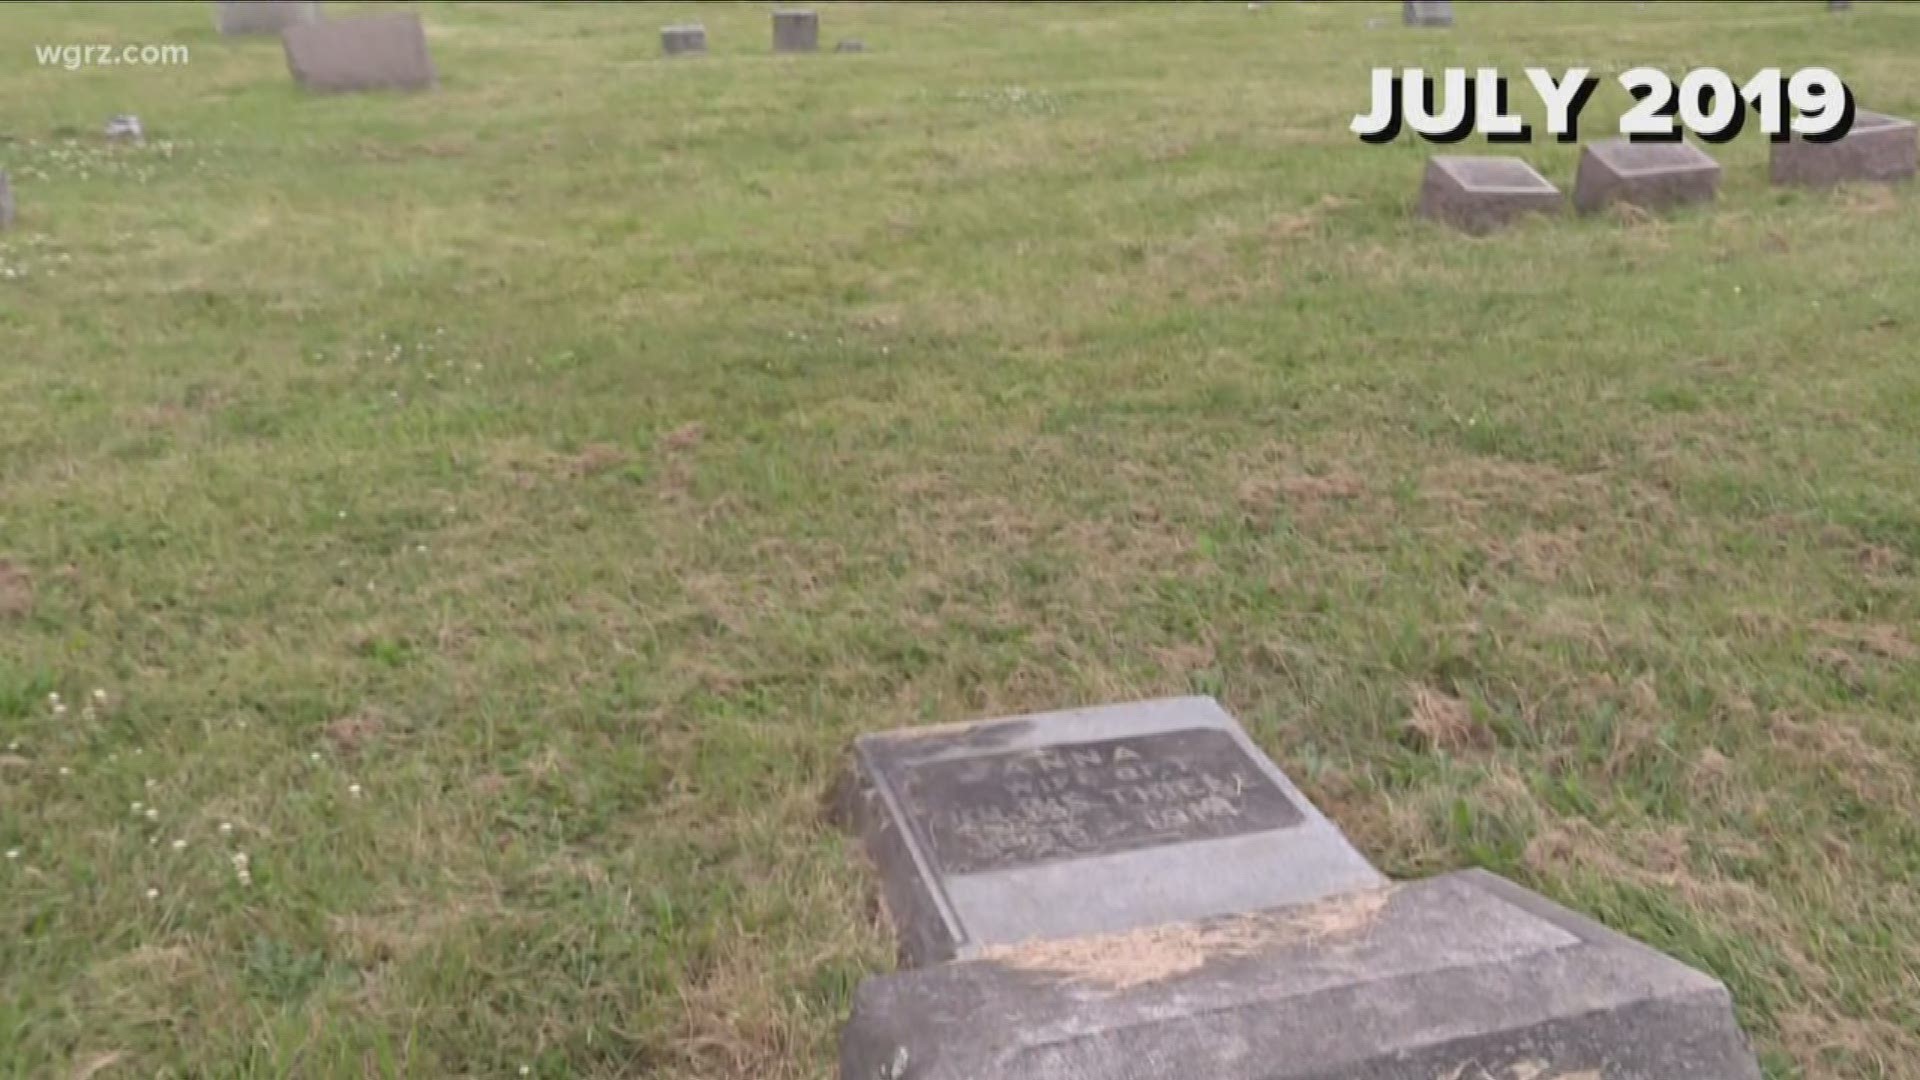 Last month a cemetery in the city of Tonawanda was in rough condition with headstones covered in weeds and some even knocked over. The community came out in true Western New York fashion to help.